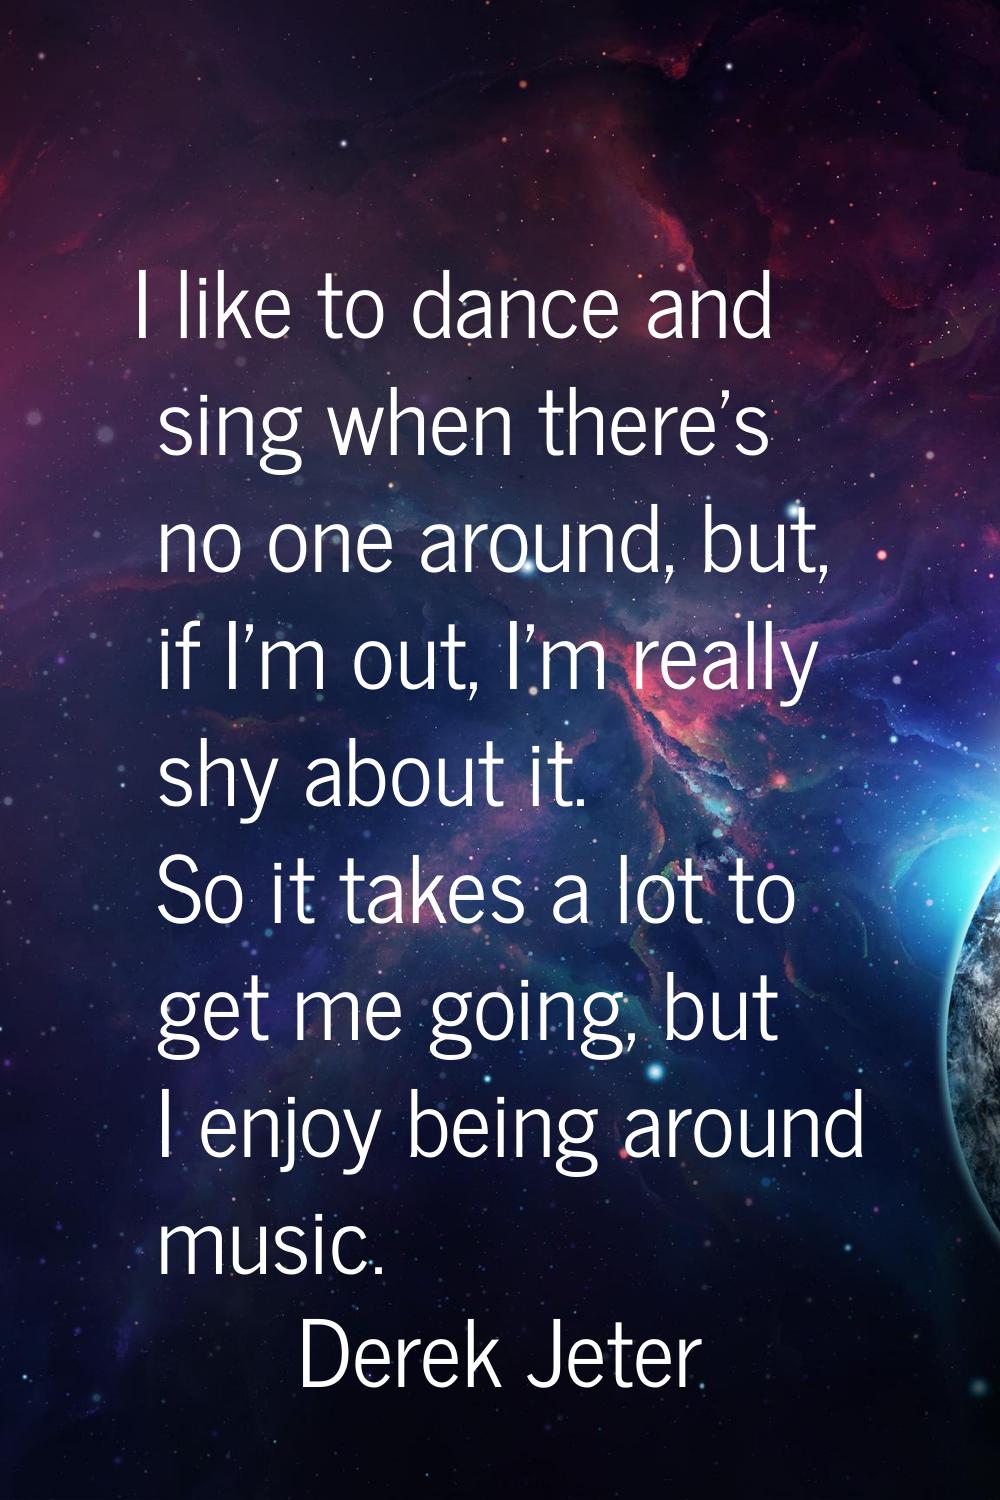 I like to dance and sing when there's no one around, but, if I'm out, I'm really shy about it. So i